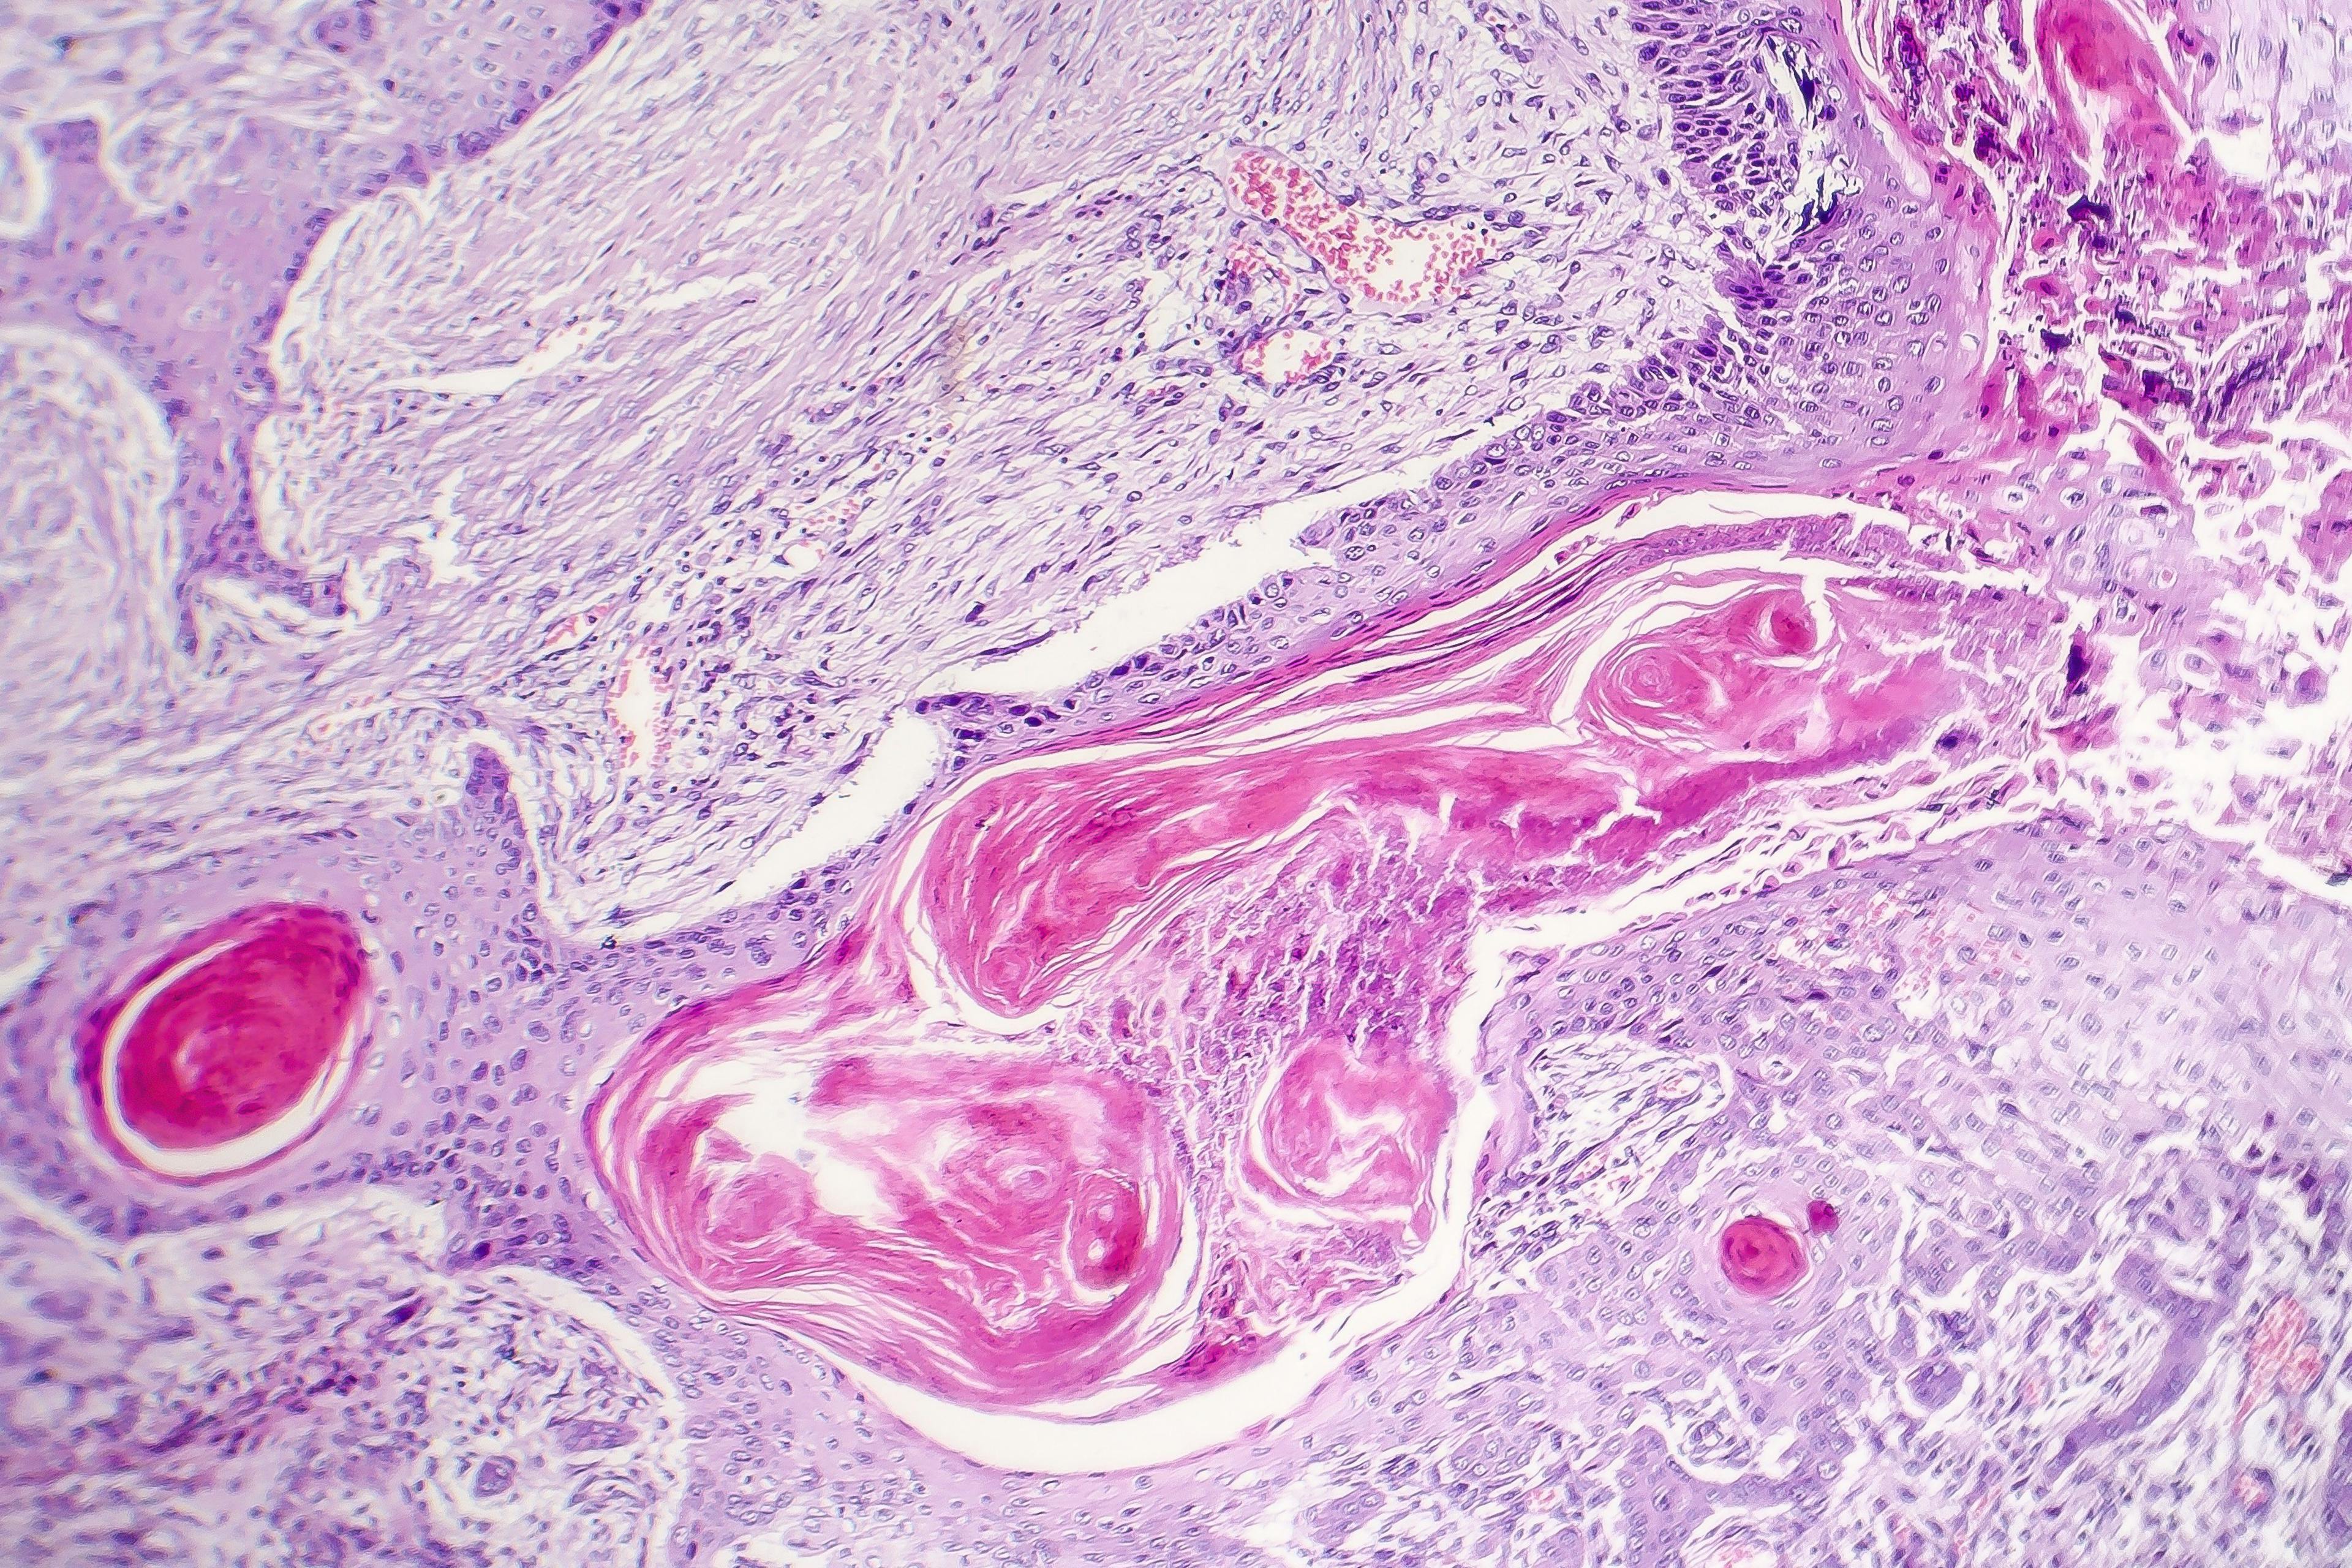 Cutaneous squamous cell carcinoma